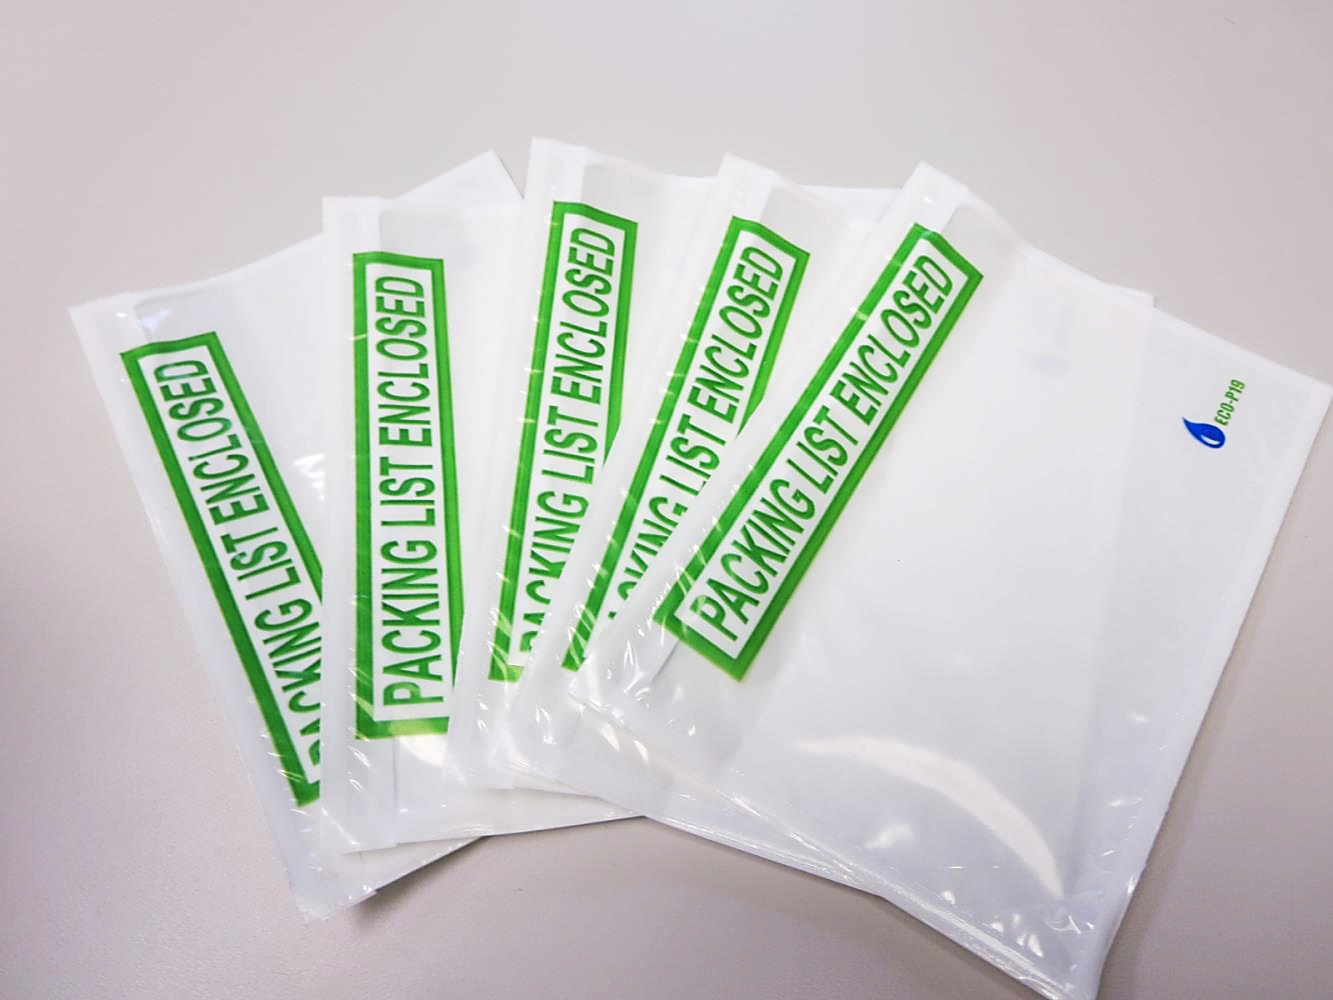  These 7.5" x 5.5" slips meet ASTM  D5511 standards while the ECO-ADM technology brings shippers and corporations enhanced biodegradable packaging supplies to make an impact in the earth friendly environmental movement. 